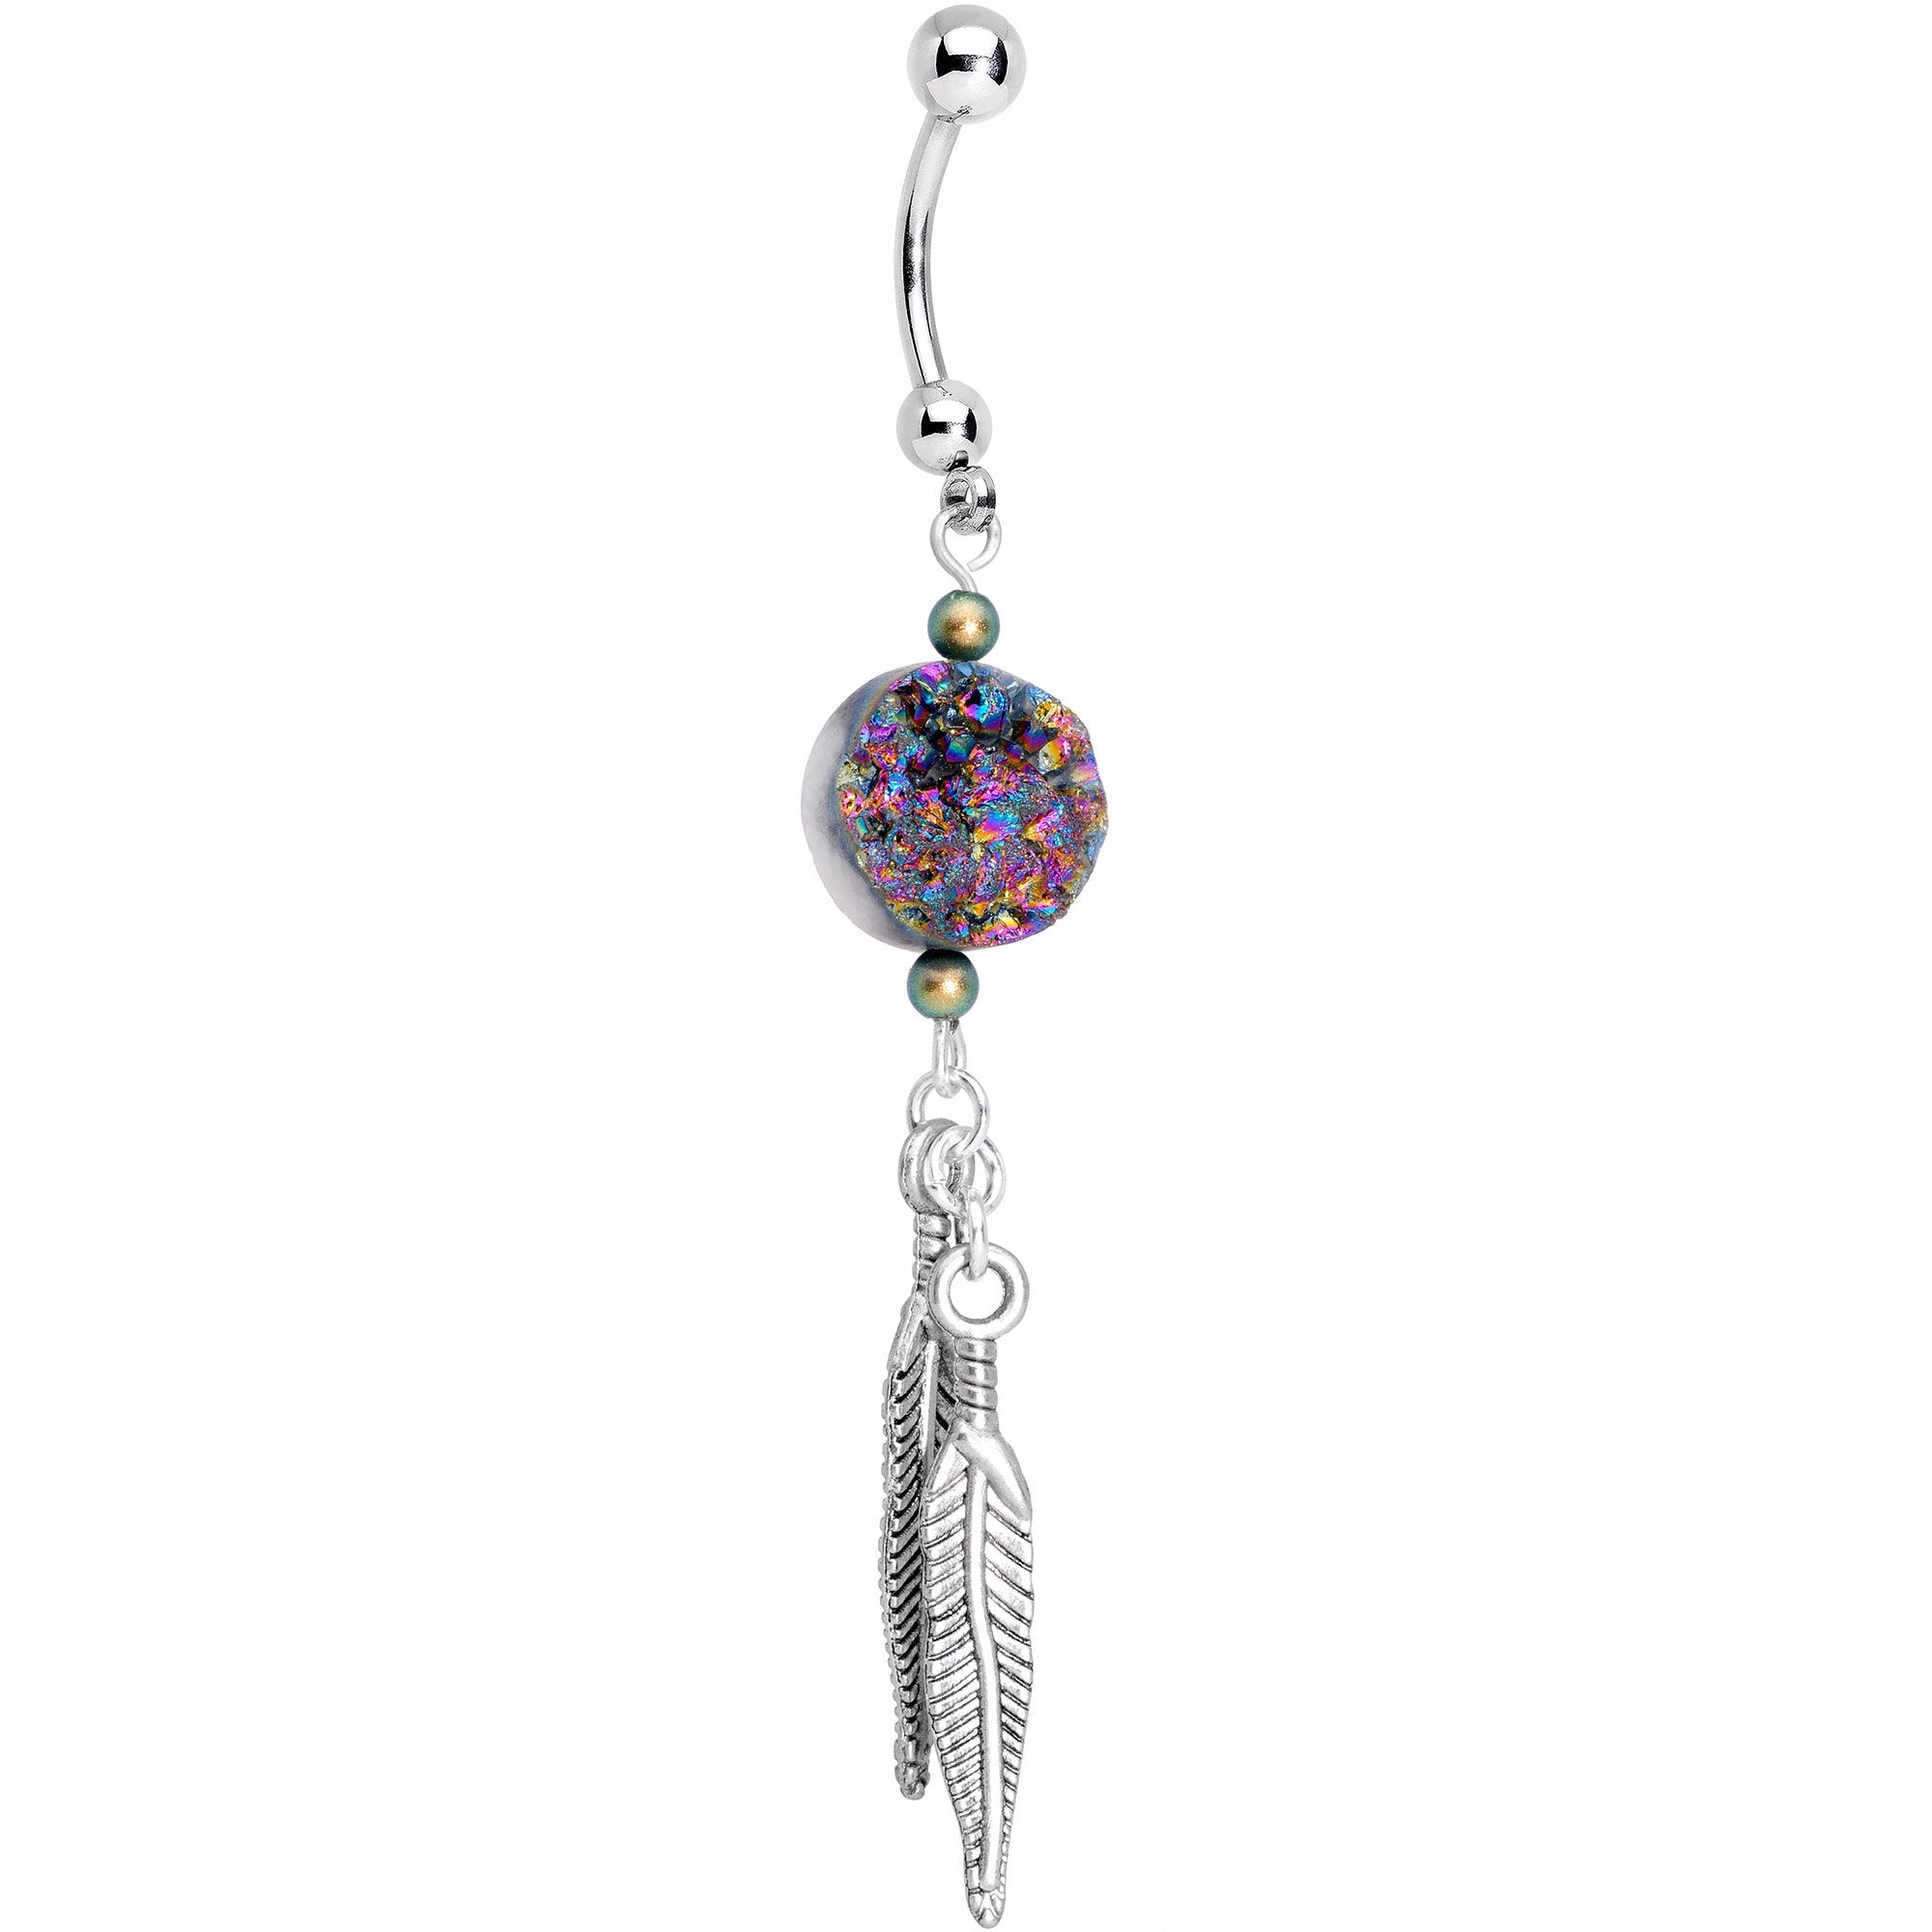 Druzy Quartz Feather Belly Ring Created with Crystals